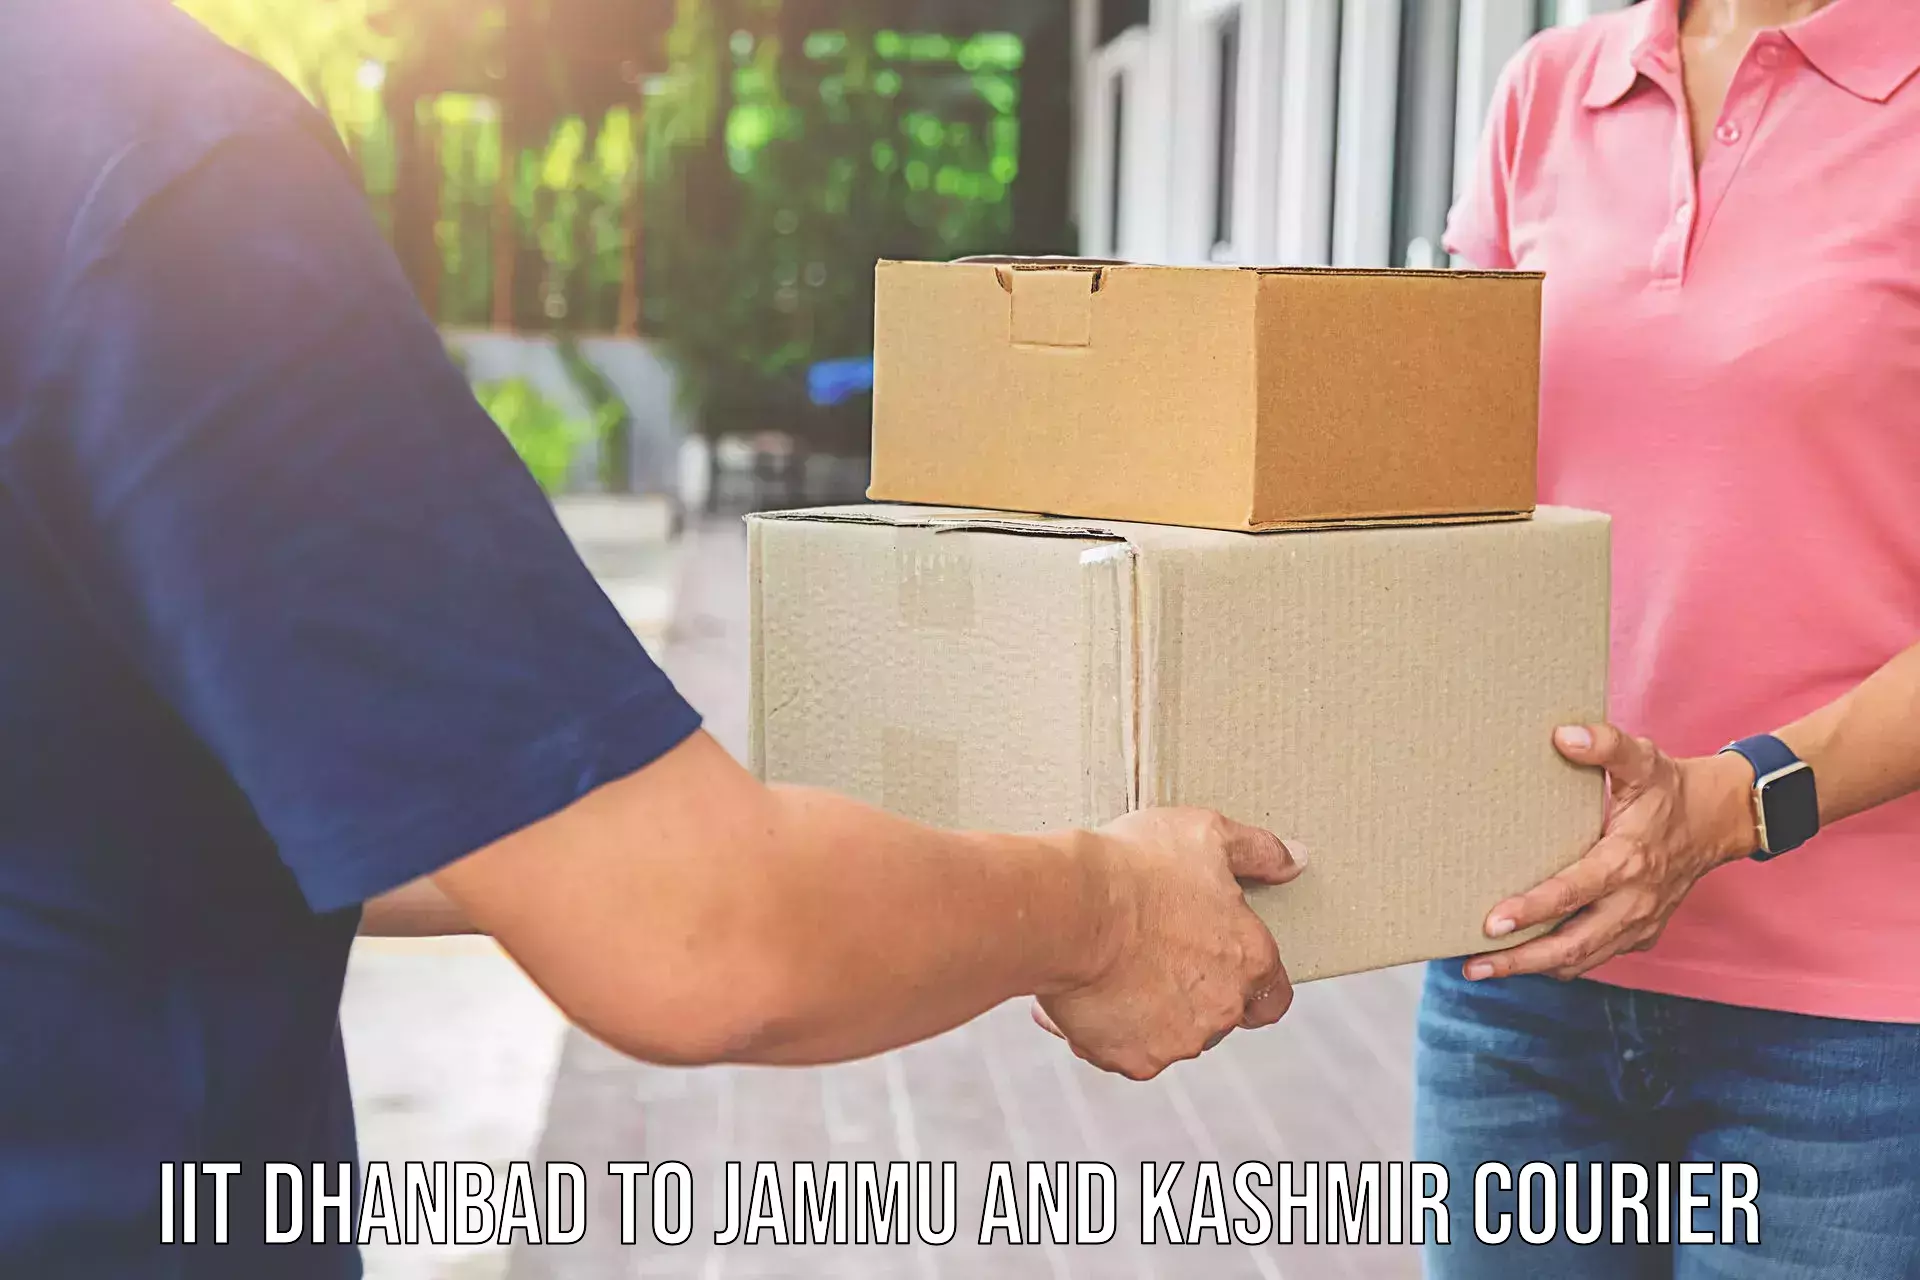 Trusted relocation experts IIT Dhanbad to Baramulla